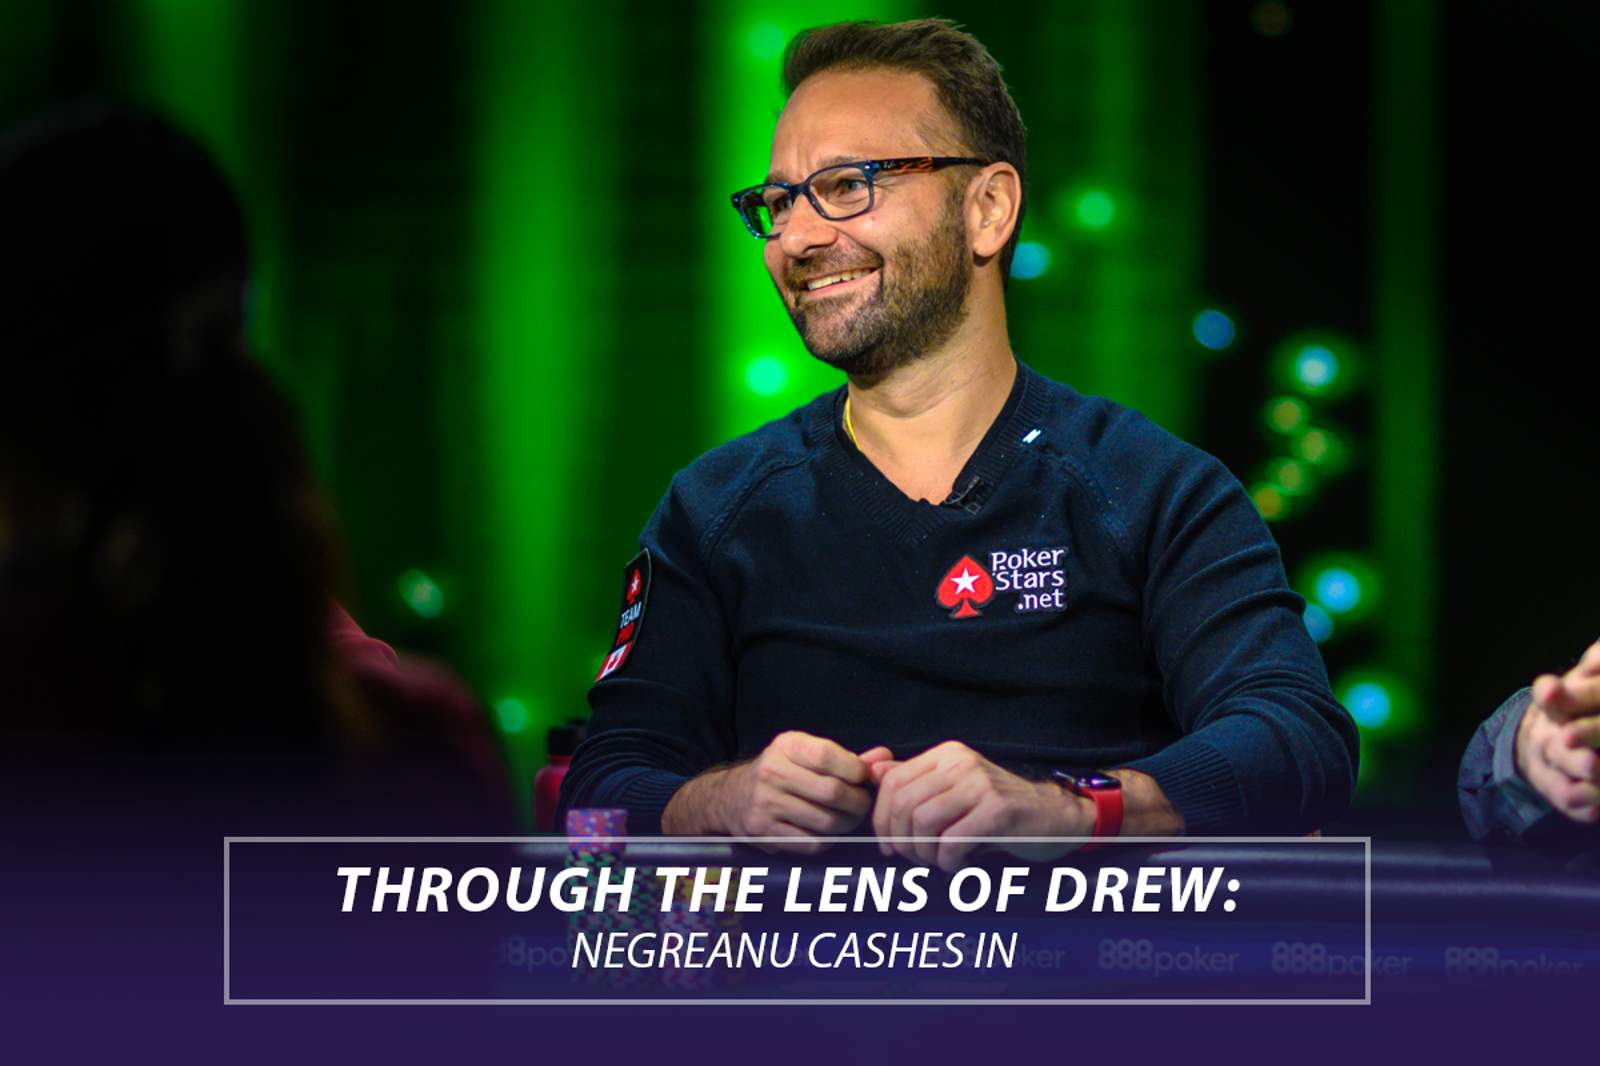 Through the Lens of Drew: Negreanu Cashes In